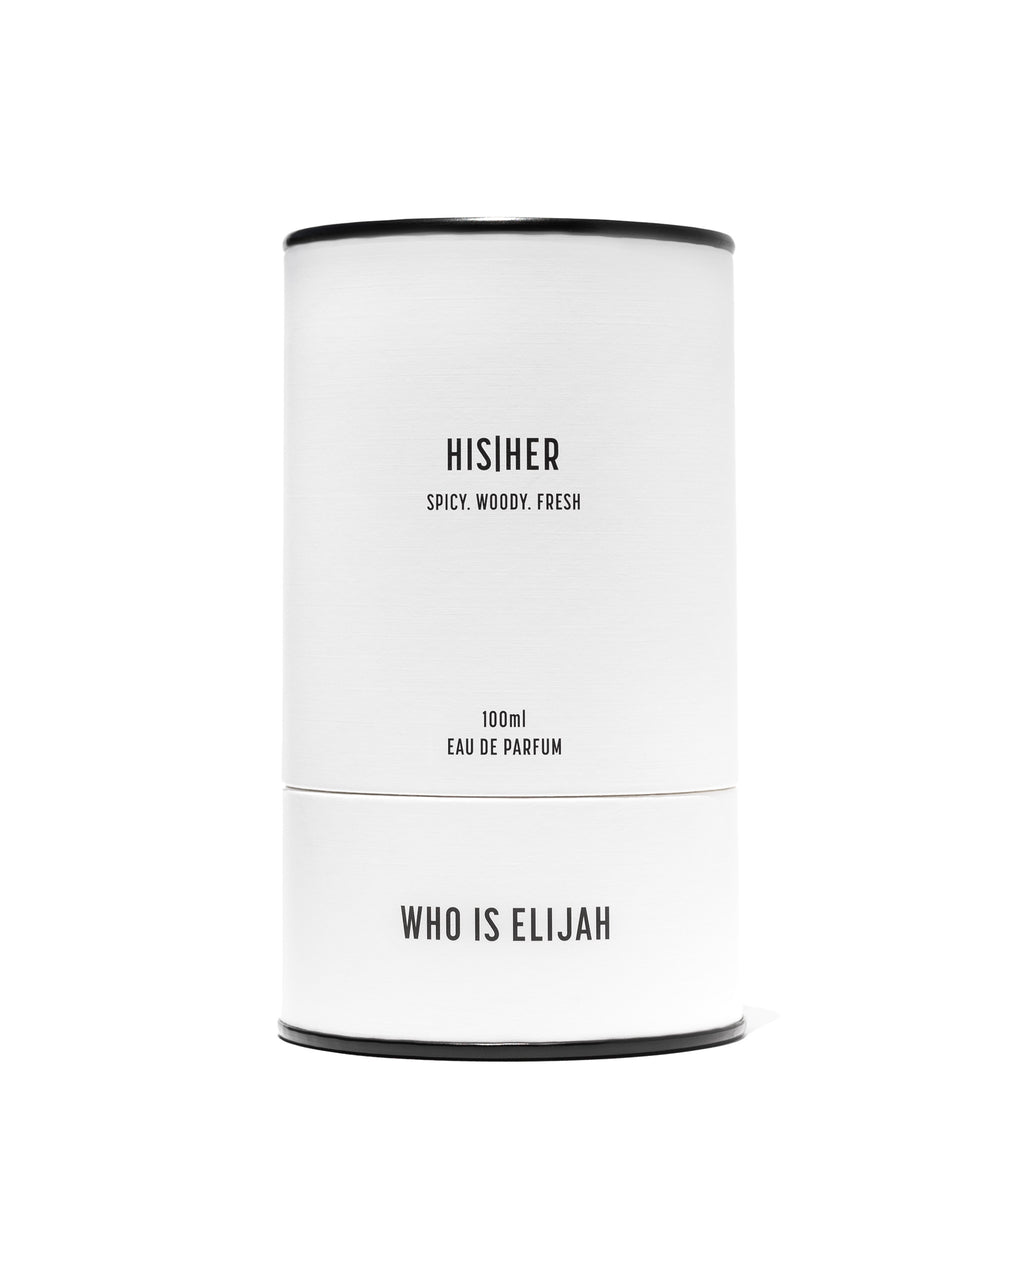 Who Is Elijah - HIS | HER - Spicy, Woody, Fresh Fragrance